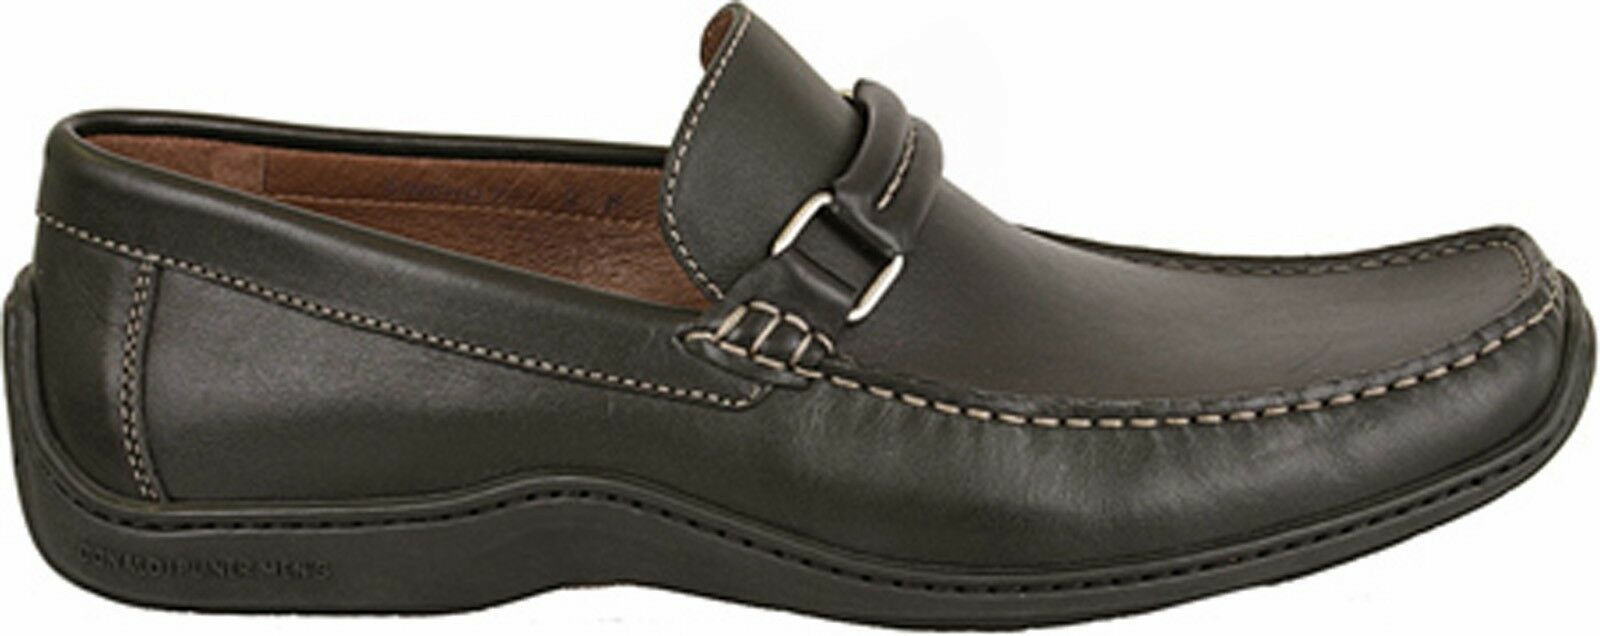 NEW Donald J Pliner (Shoes)!  9   Dark Brown  Eincho Model Driving Loafers - $99.99